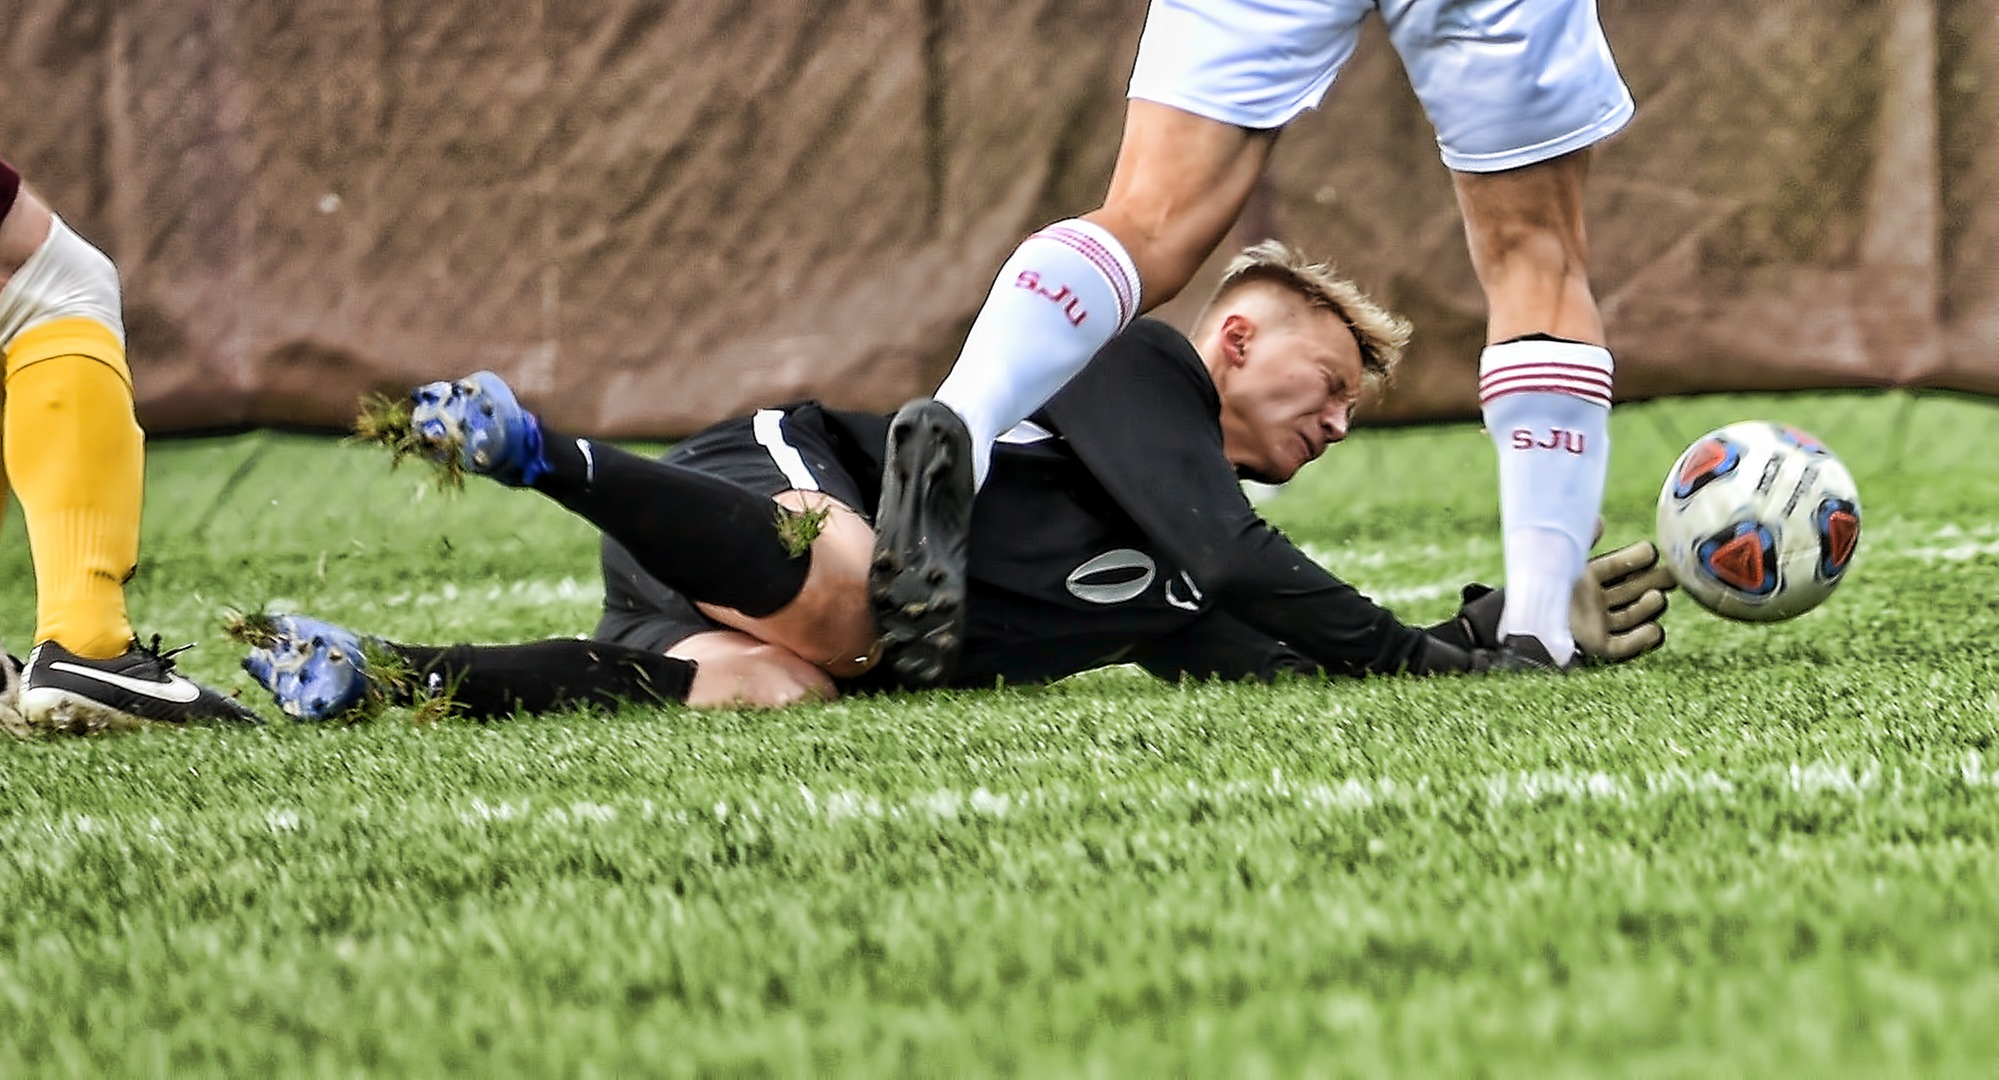 Cobber senior goalie Keith Sullivan makes a diving stop at the feet of a St. John's player. Sullivan stopped a penalty kick in the second half of the MIAC opener.